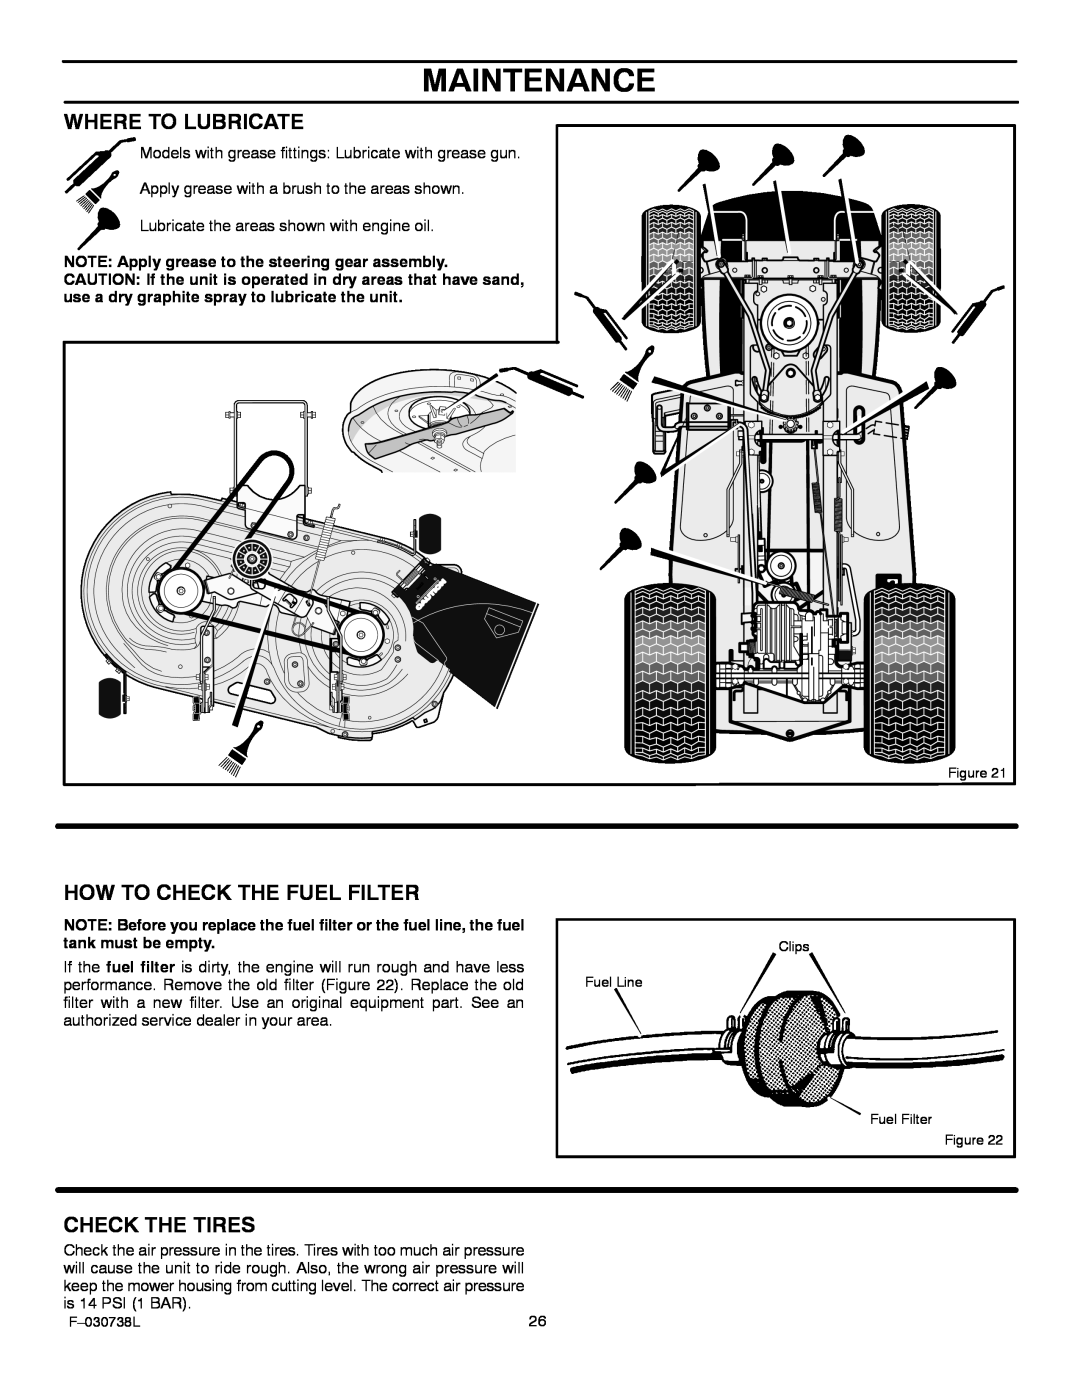 Murray 425603x99A manual Maintenance, Where To Lubricate, How To Check The Fuel Filter, Check The Tires 